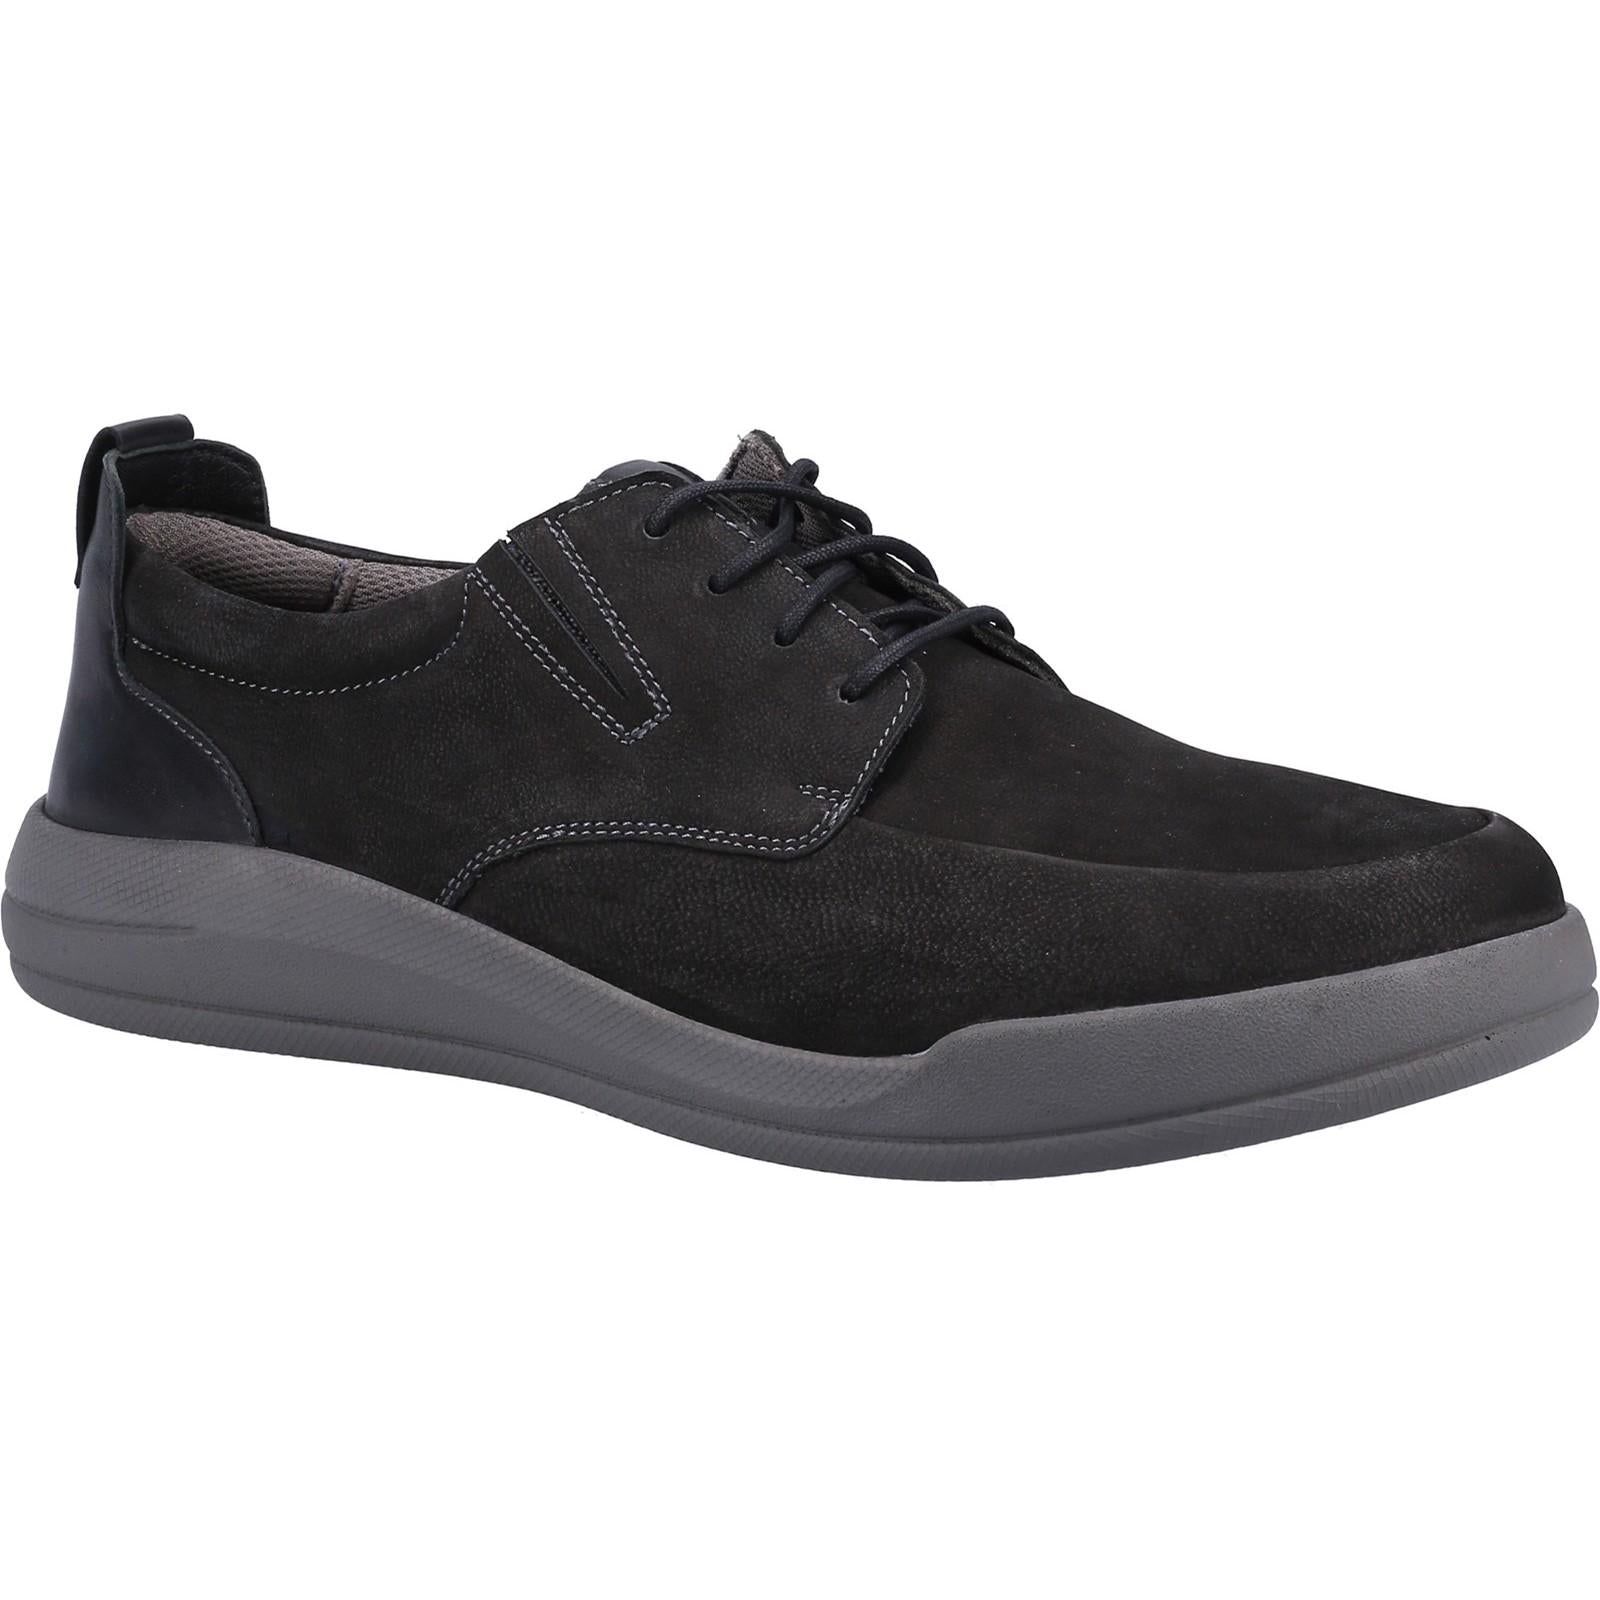 Hush Puppies Eric Lace Up Shoes